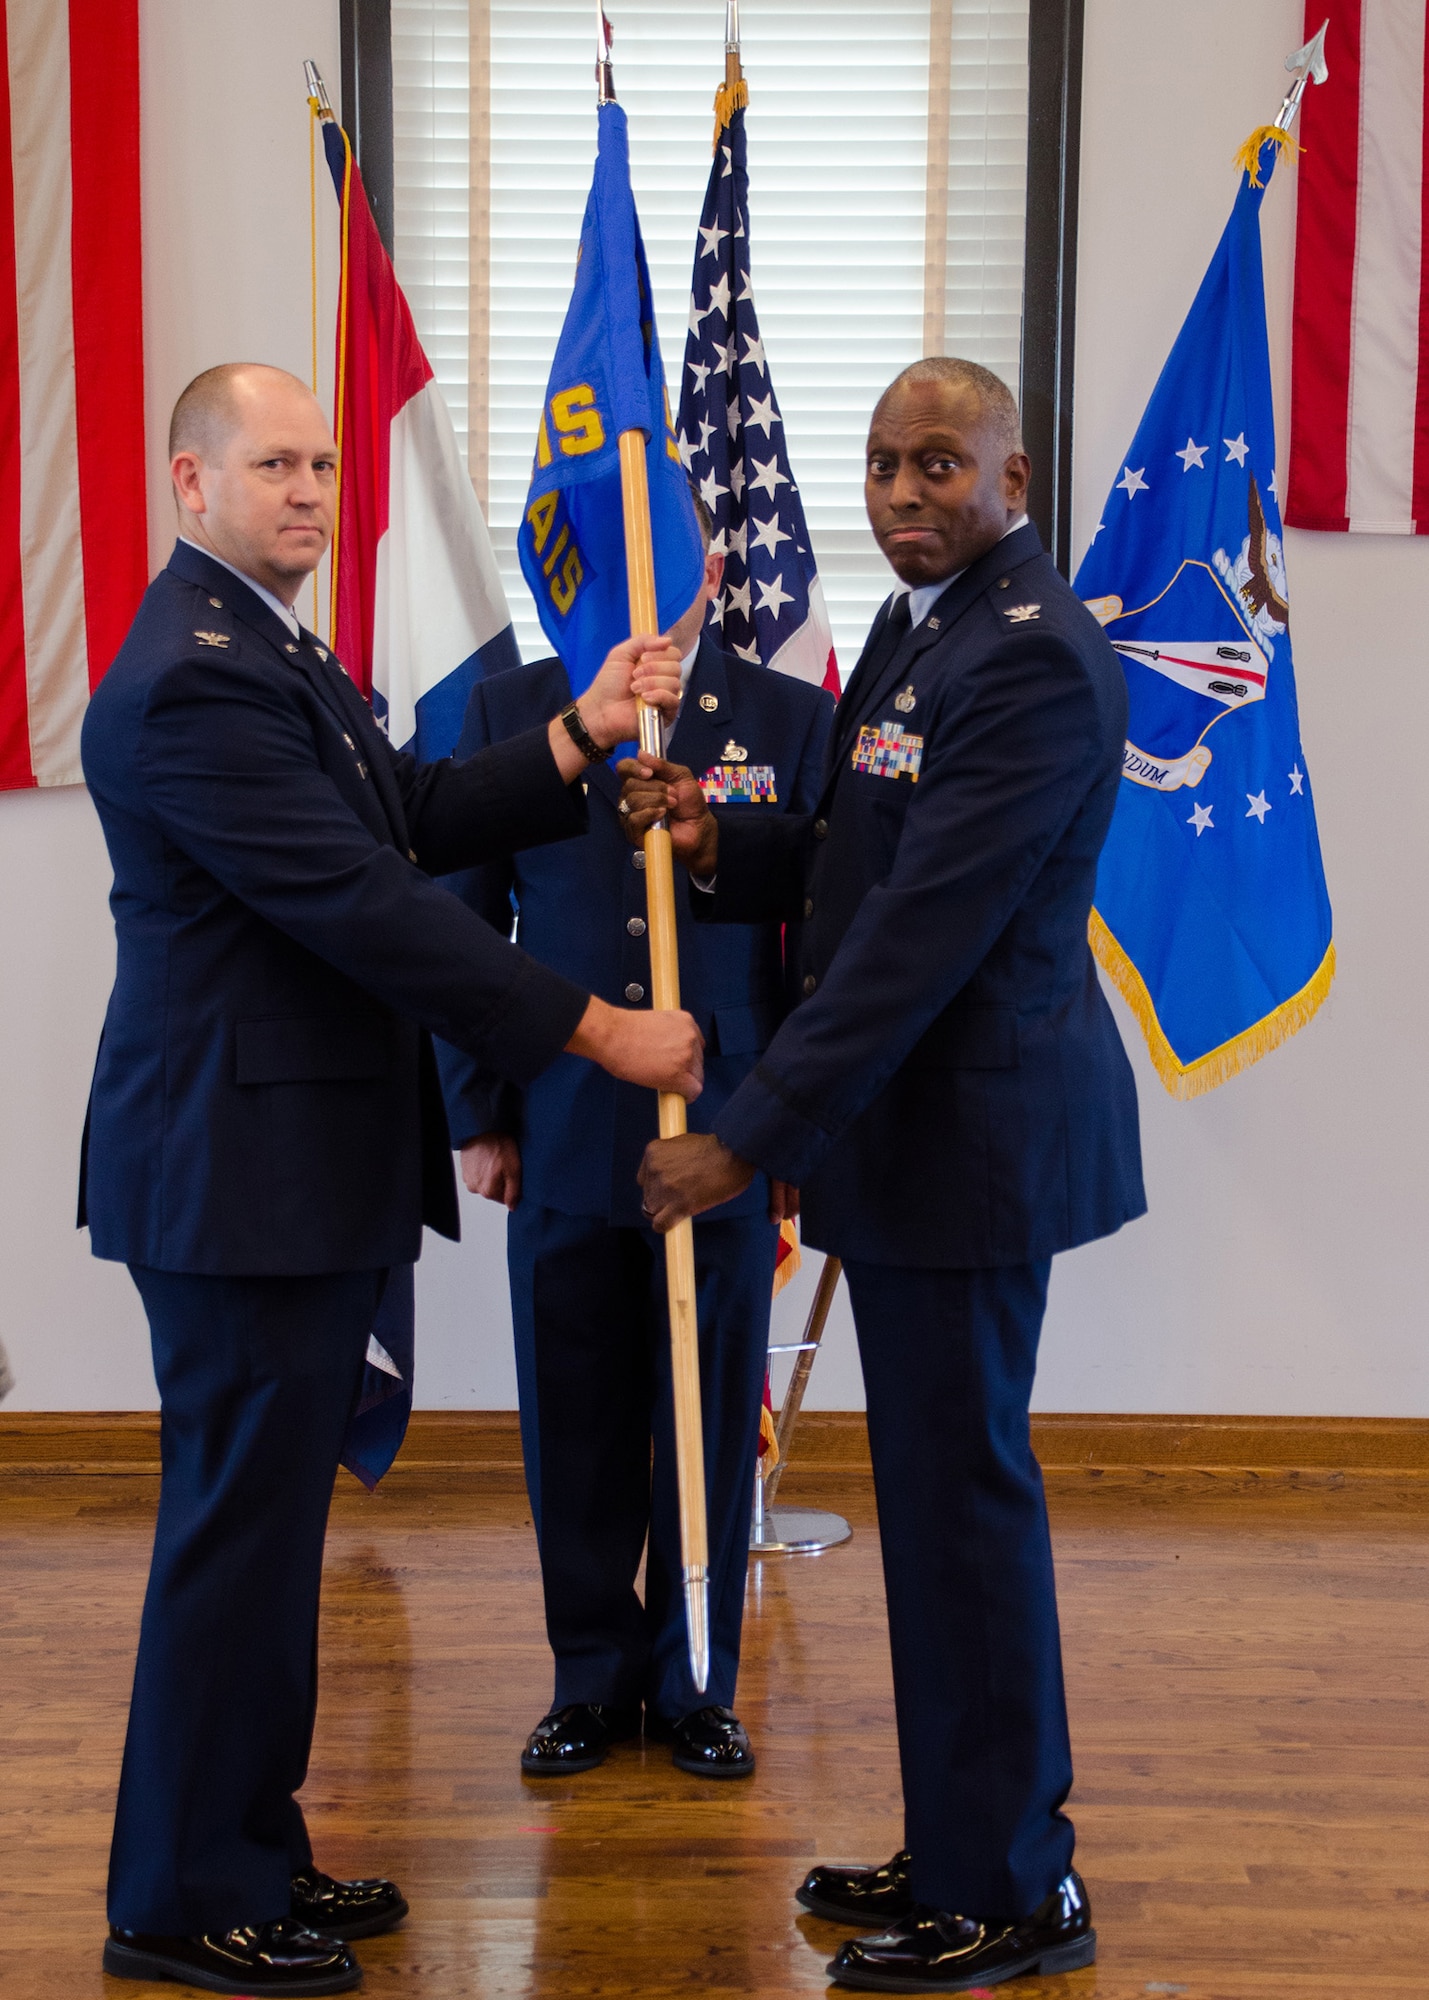 Col. William Boothman, 157th Air Operations Group commander, hands the unit guidon, and with it, leadership authority, to Col. Chip Atterbury, 157th Air Intelligence Squadron commander, at Jefferson Barracks Air National Guard Base, Missouri, during drill Nov. 5, 2016. Three new commanders took charge of three new squadrons -- the 157th AIS, the 157th Combat Operations Squadron and the 157th Air Communications Squadron, new units of the 157th AOG -- at a single assumption of command ceremony. (U.S. Air National Guard photo by Staff Sgt. Brittany Cannon)